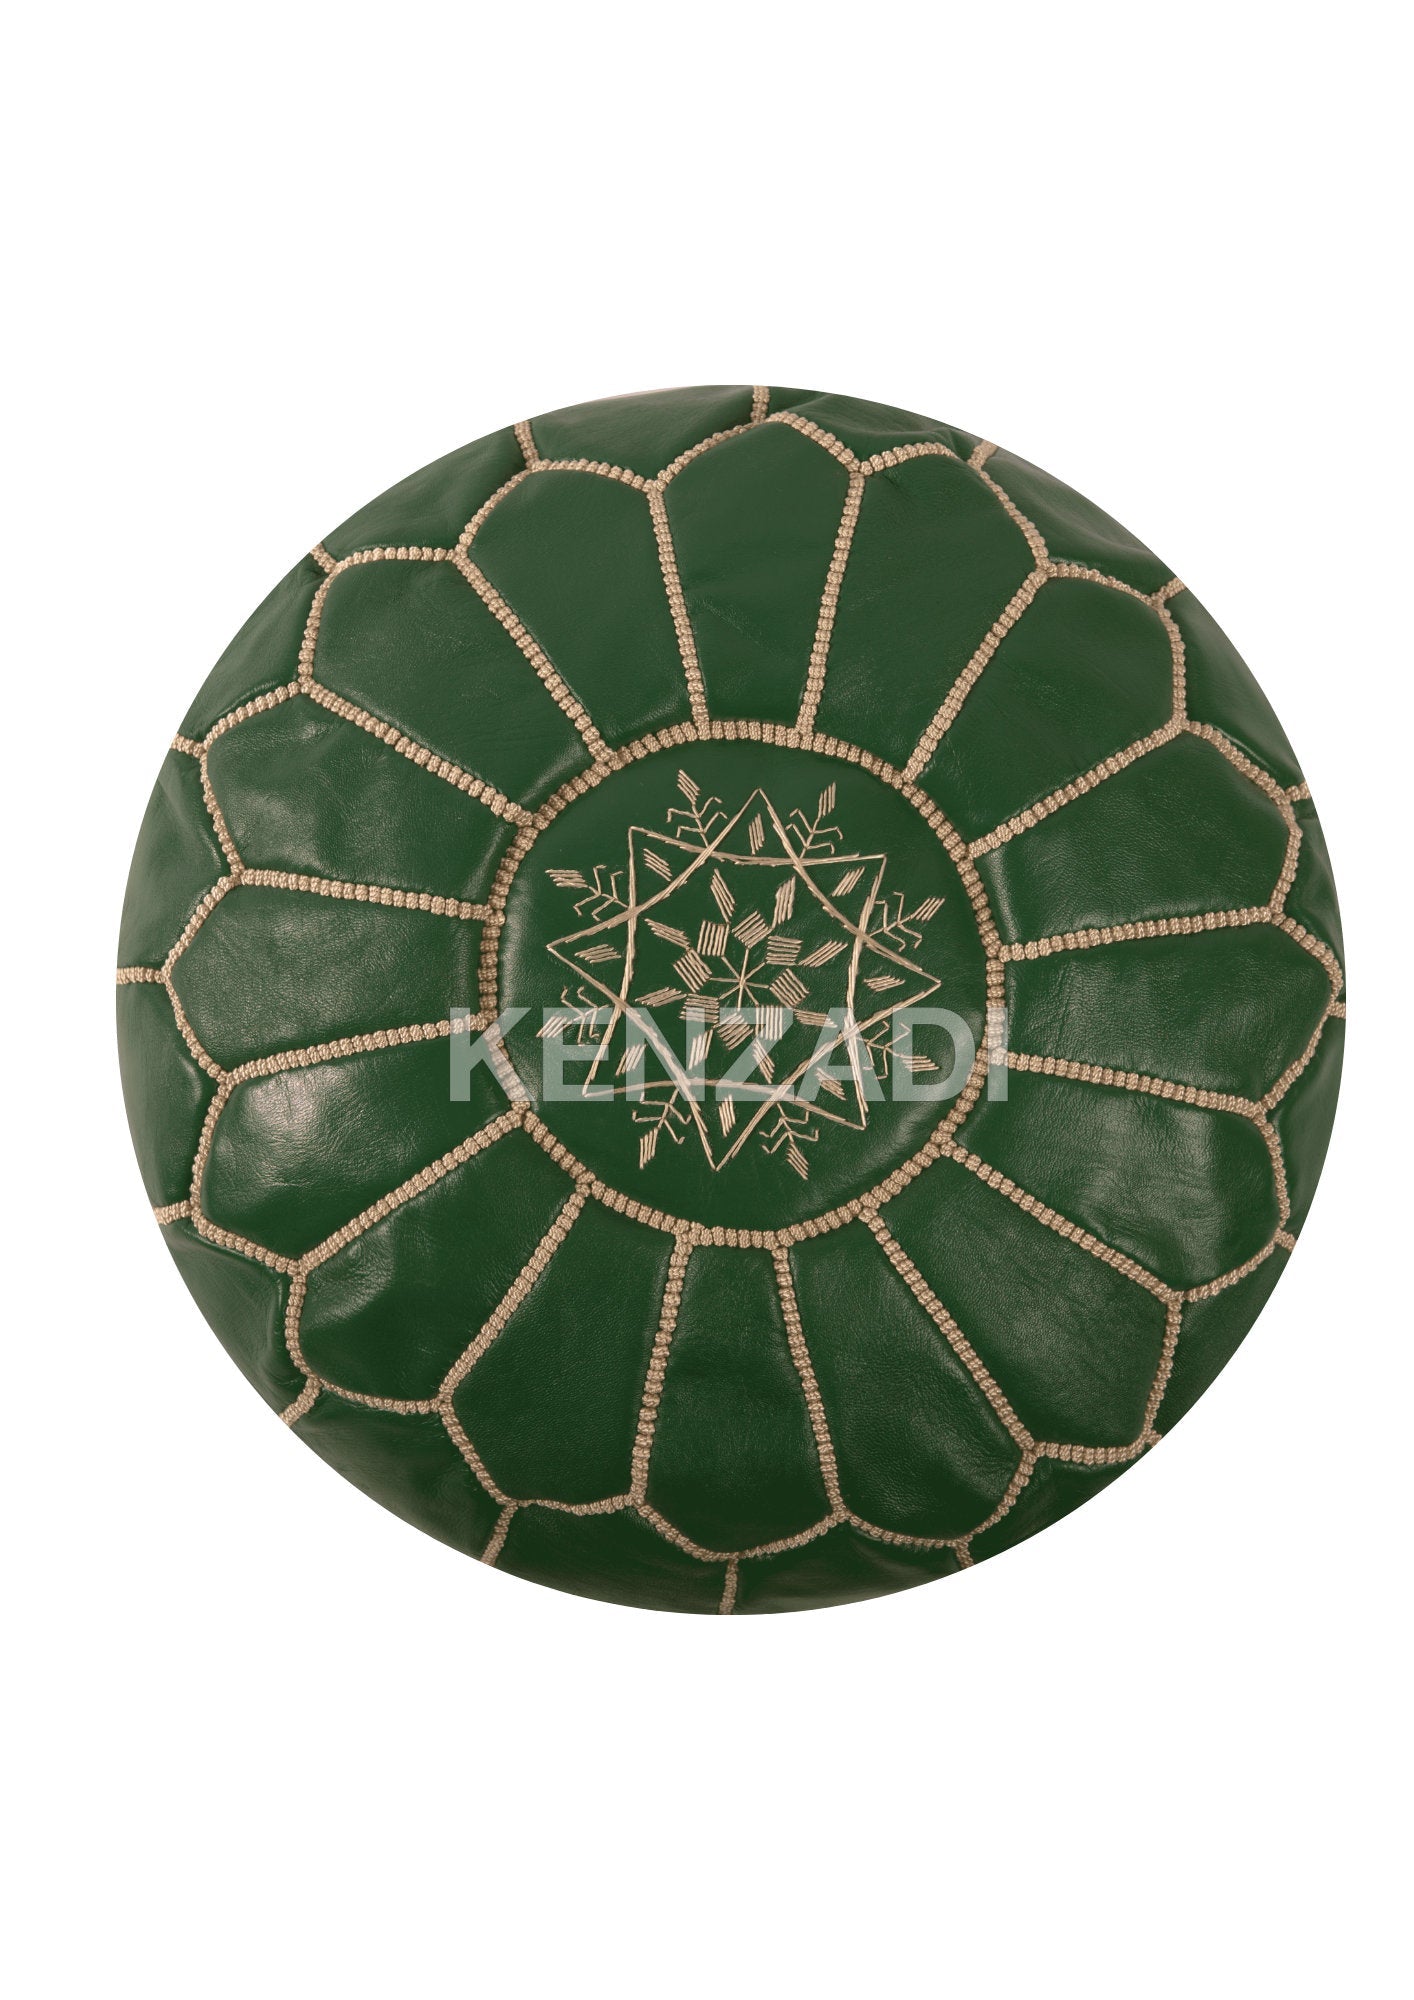 Authentic Moroccan round leather pouf in sewn tan leather with dark green and beige embroidery